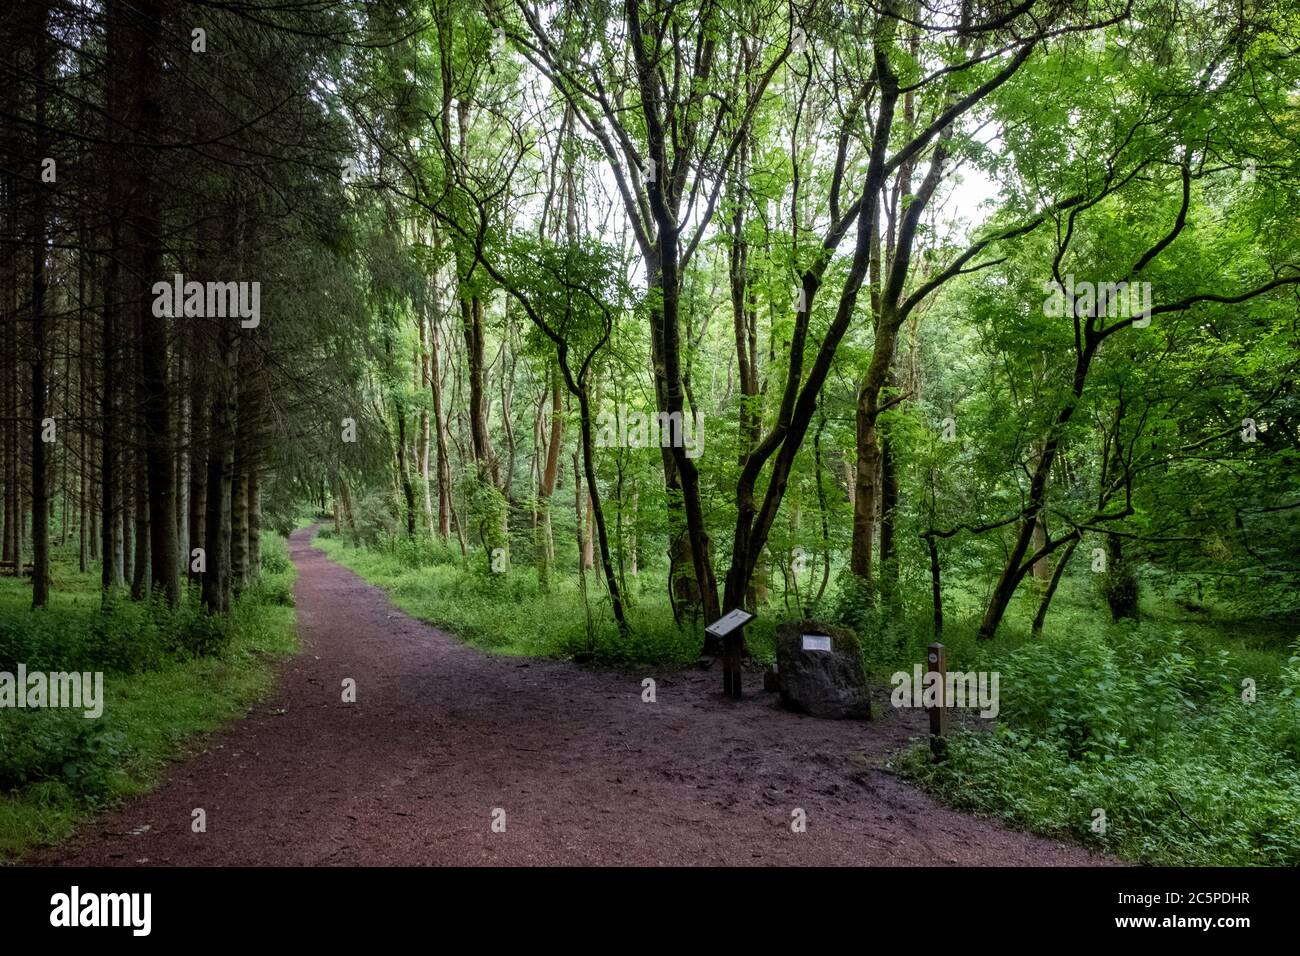 Location of the Dechmont Woods UFO incident. Forestry worker Robert Taylor reported seeing an alien spaceship in the woods near Livingston, in 1979. Stock Photo